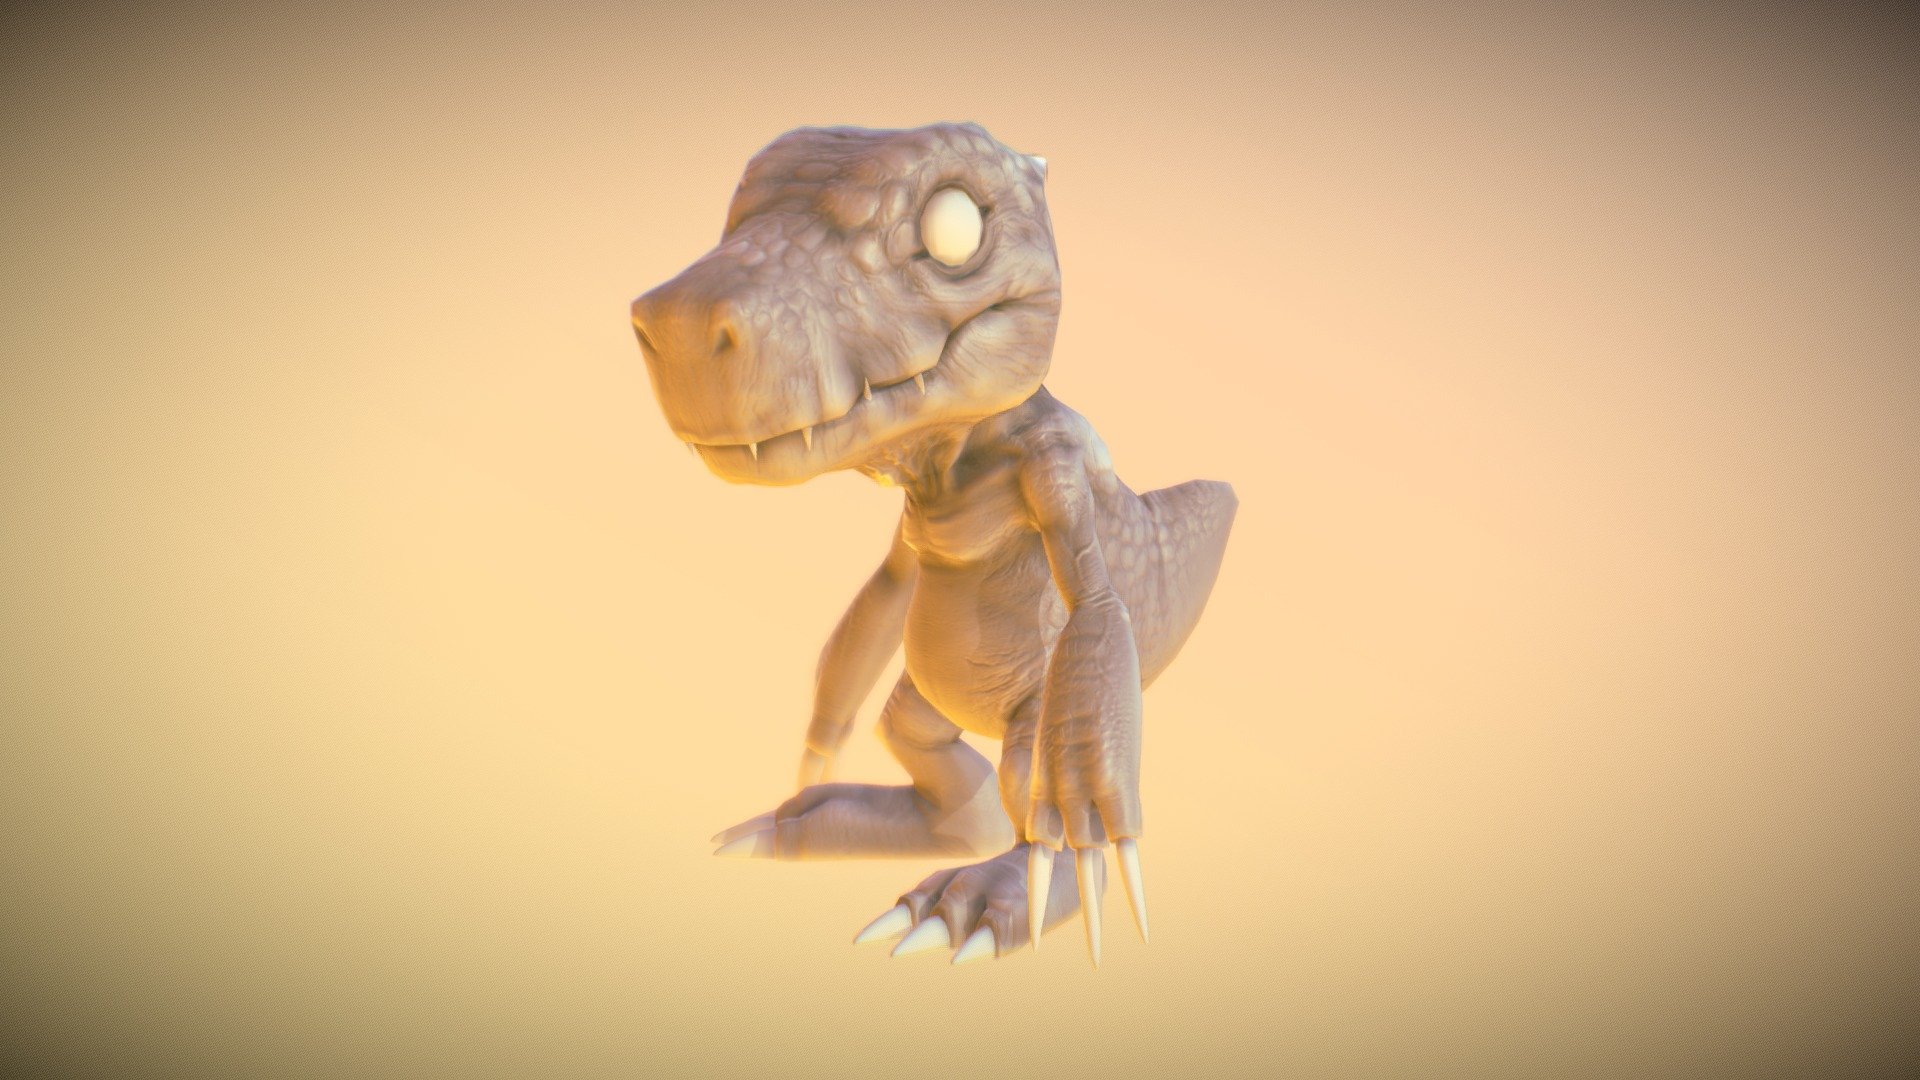 Buiilt on my twitch stream to teach Zbrush
https://www.twitch.tv/eleven3d I've also 3D printed this, the model can be seen on my instagram https://www.instagram.com/eleven3d/ - Agumon WIP - Download Free 3D model by Jade L (@3levan) 3d model